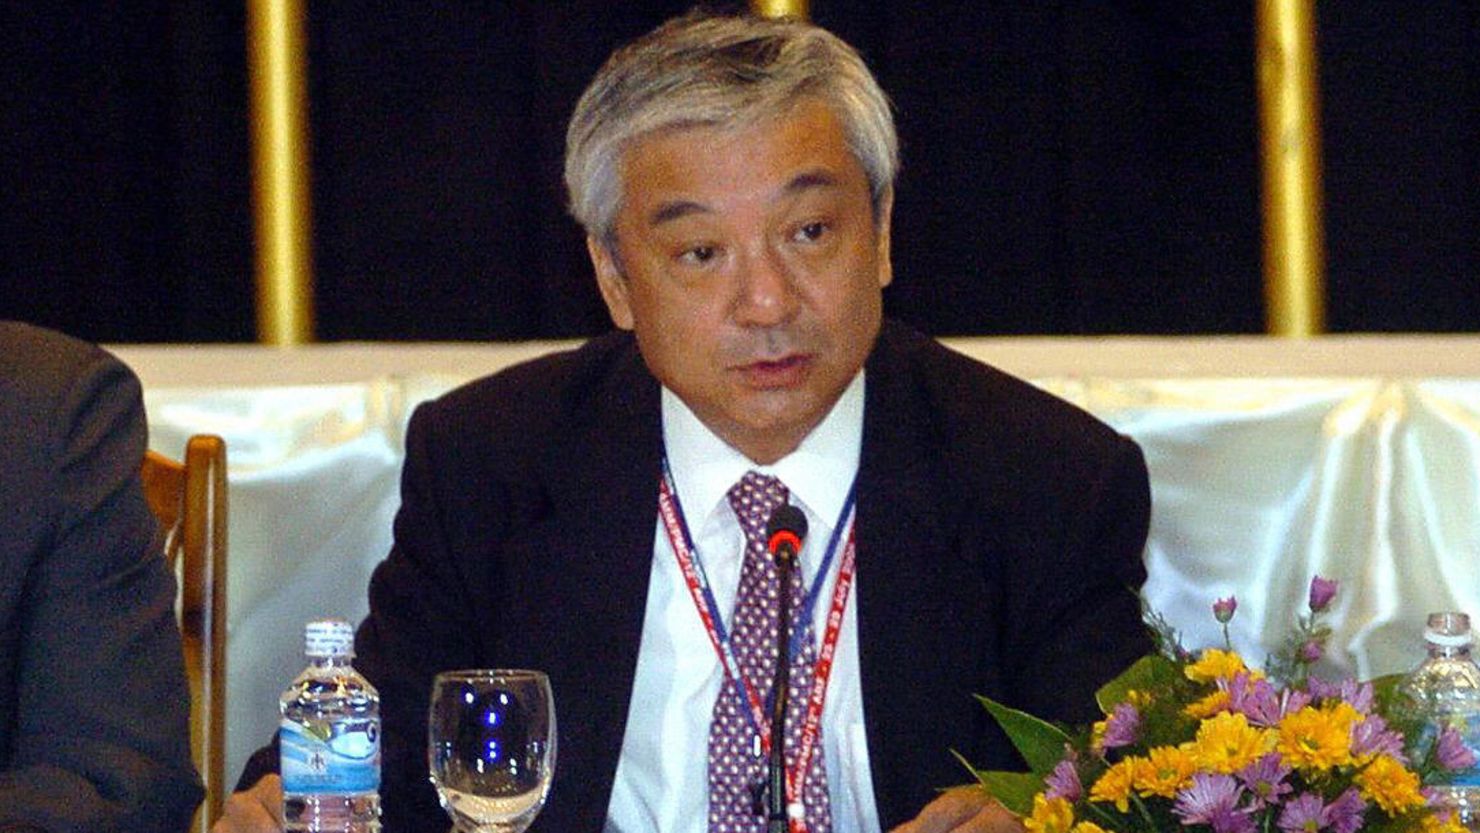  Shinichi Nishimiya (C) addresses a joint press conference during a 2005 gathering of the Association of Southeast Asian Nations (ASEAN).